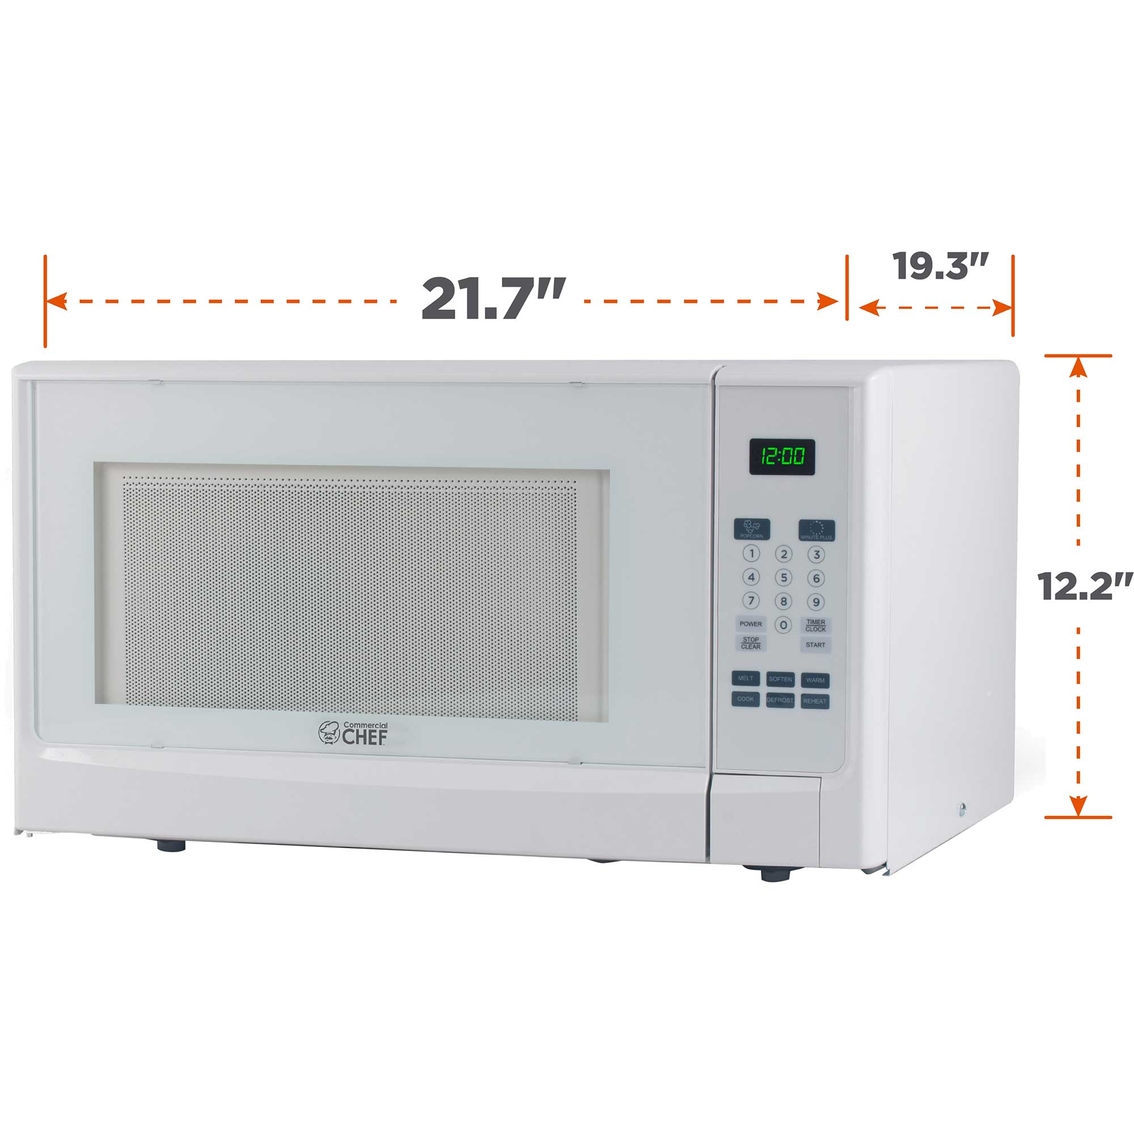 Commercial Chef 1.4 cu. ft. Counter Top Microwave - Image 3 of 7